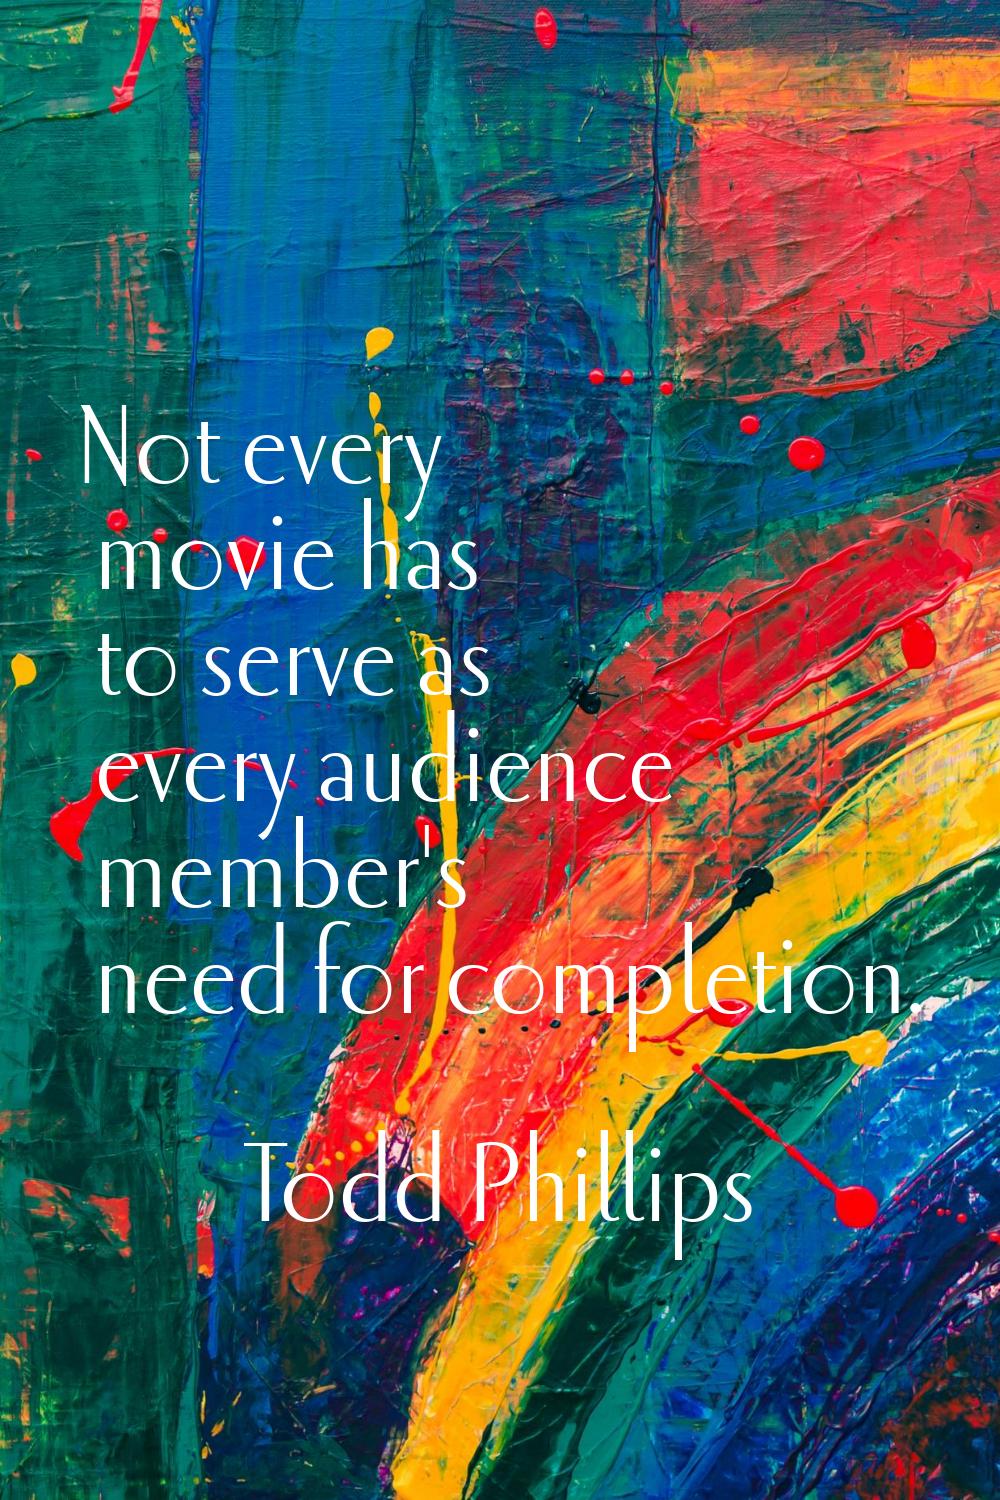 Not every movie has to serve as every audience member's need for completion.